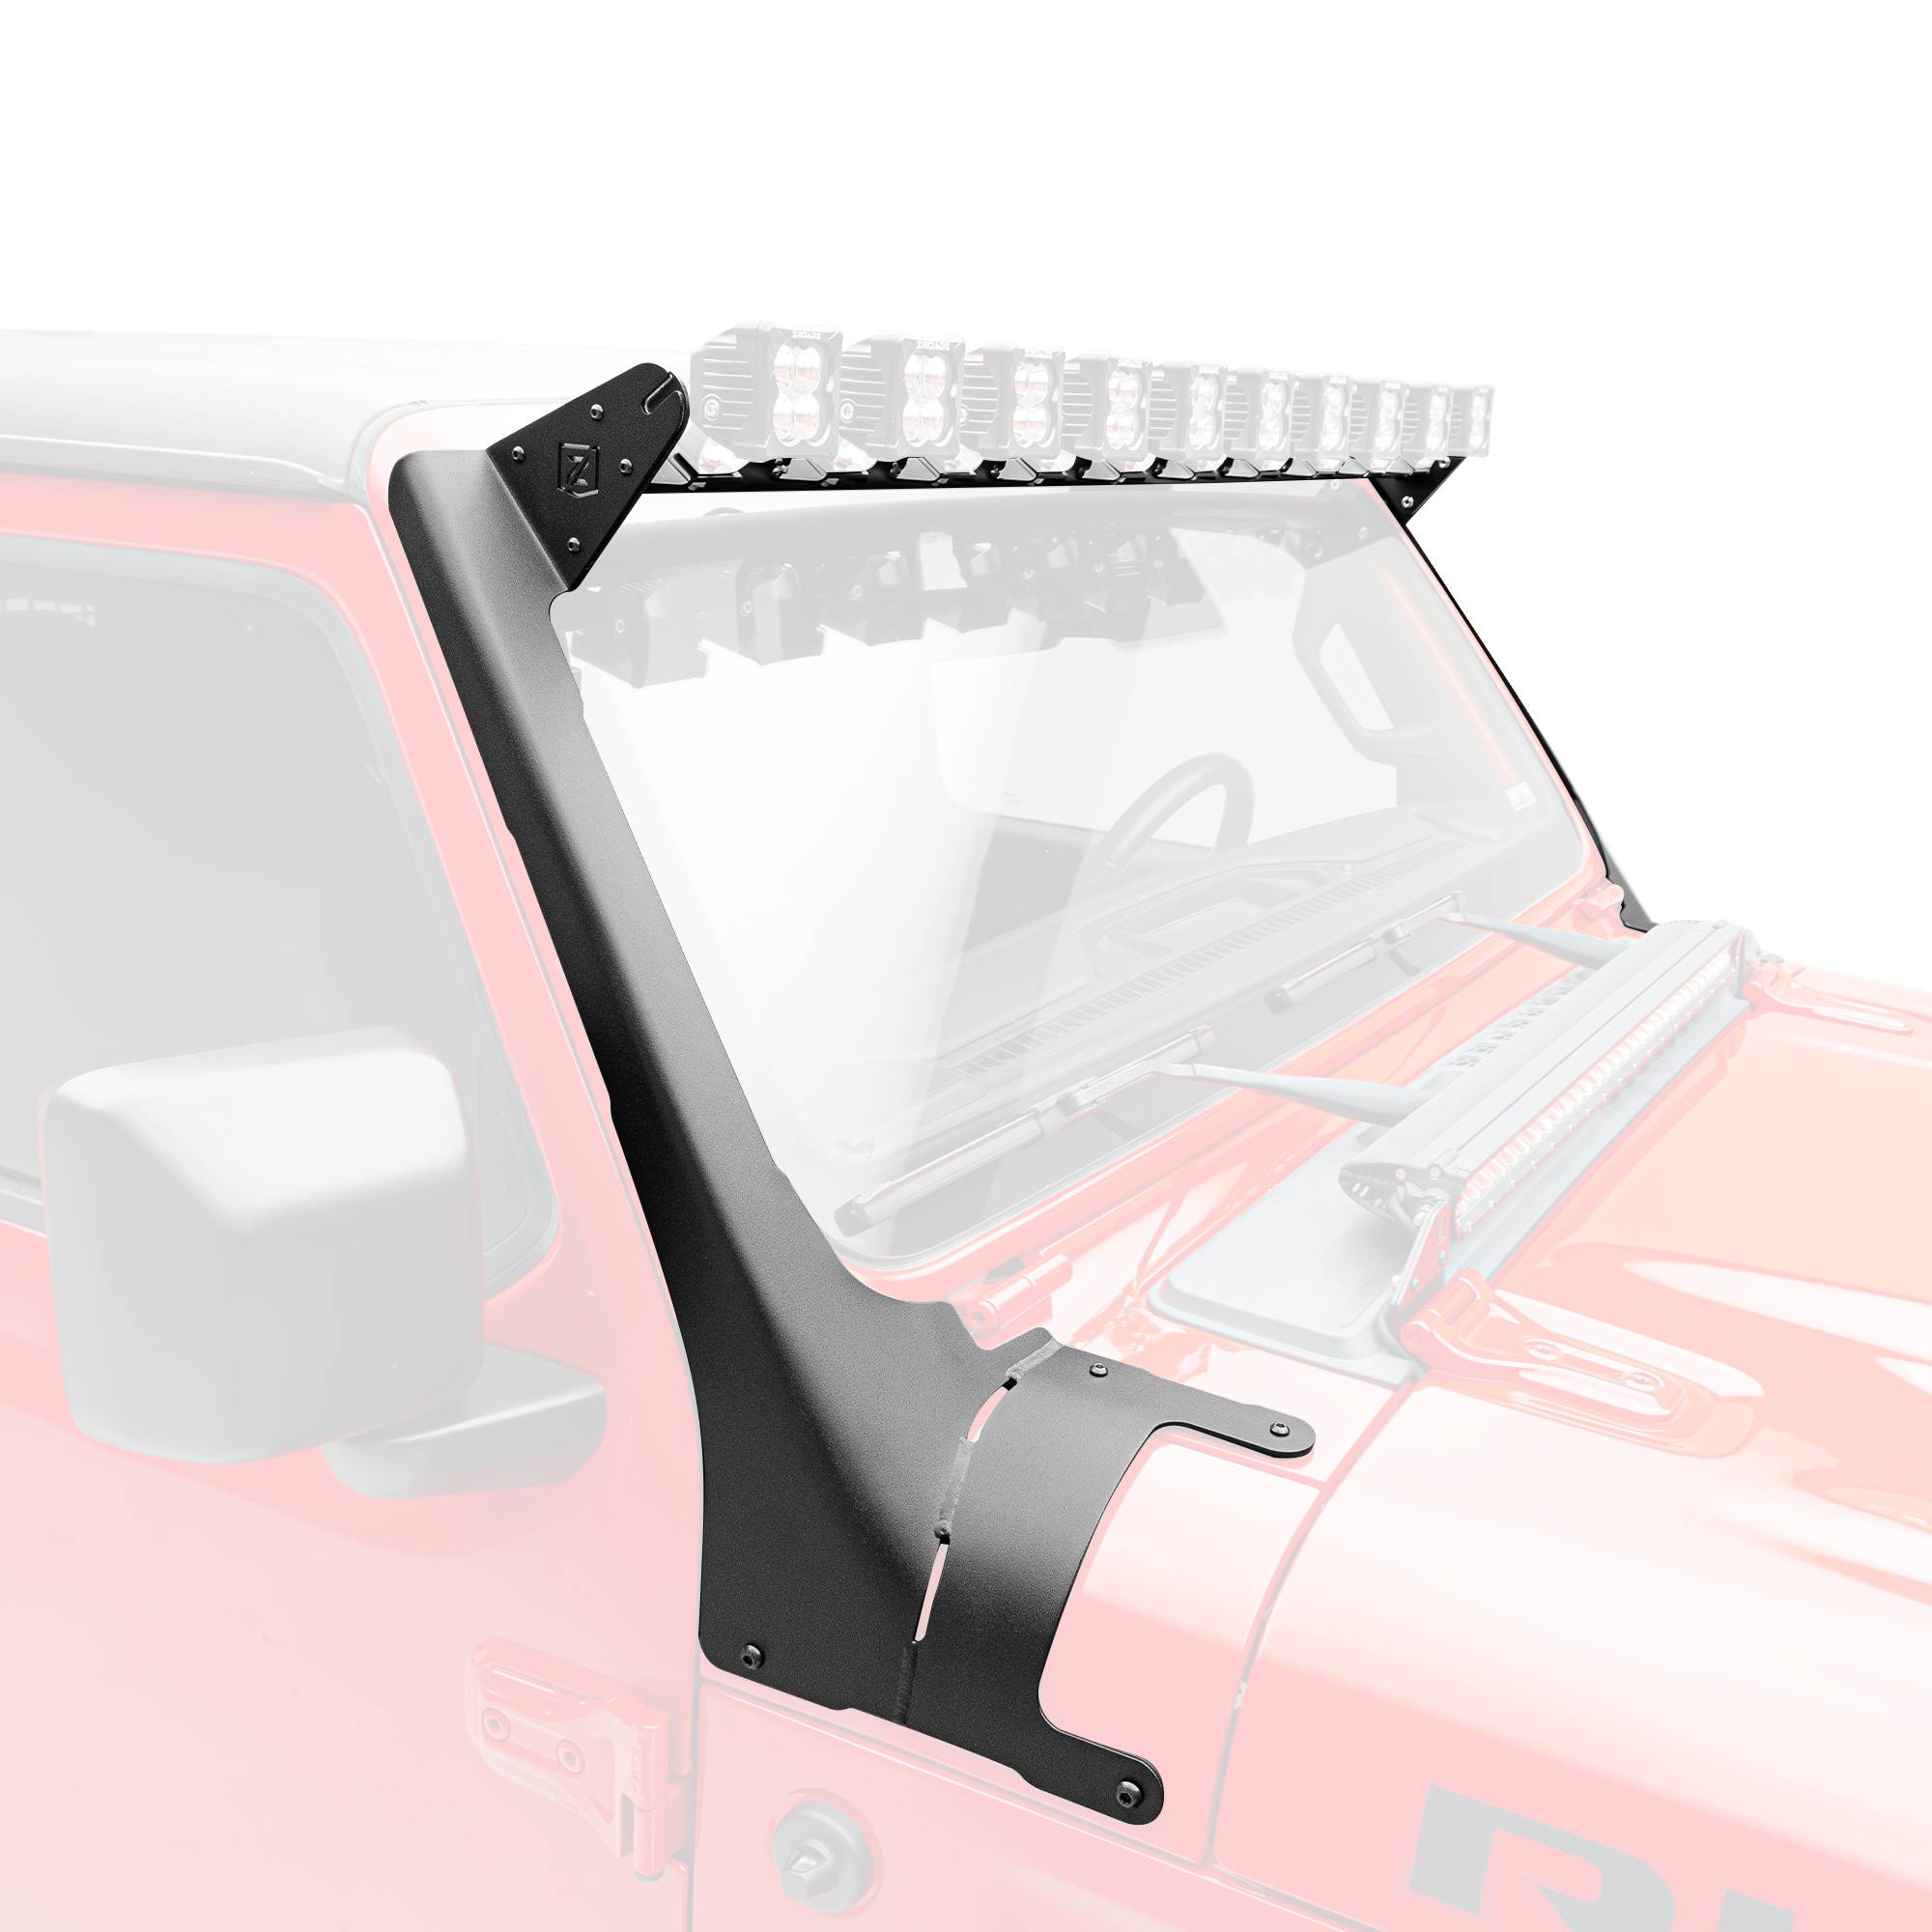 ZROADZ OFF ROAD PRODUCTS - 2019-2022 Jeep Gladiator, JL Multi-LED Roof Cross Bar and A-Pillar Brackets ONLY, Holds (10) 3-Inch ZROADZ Light Pods (Not Included) - Part # Z934931